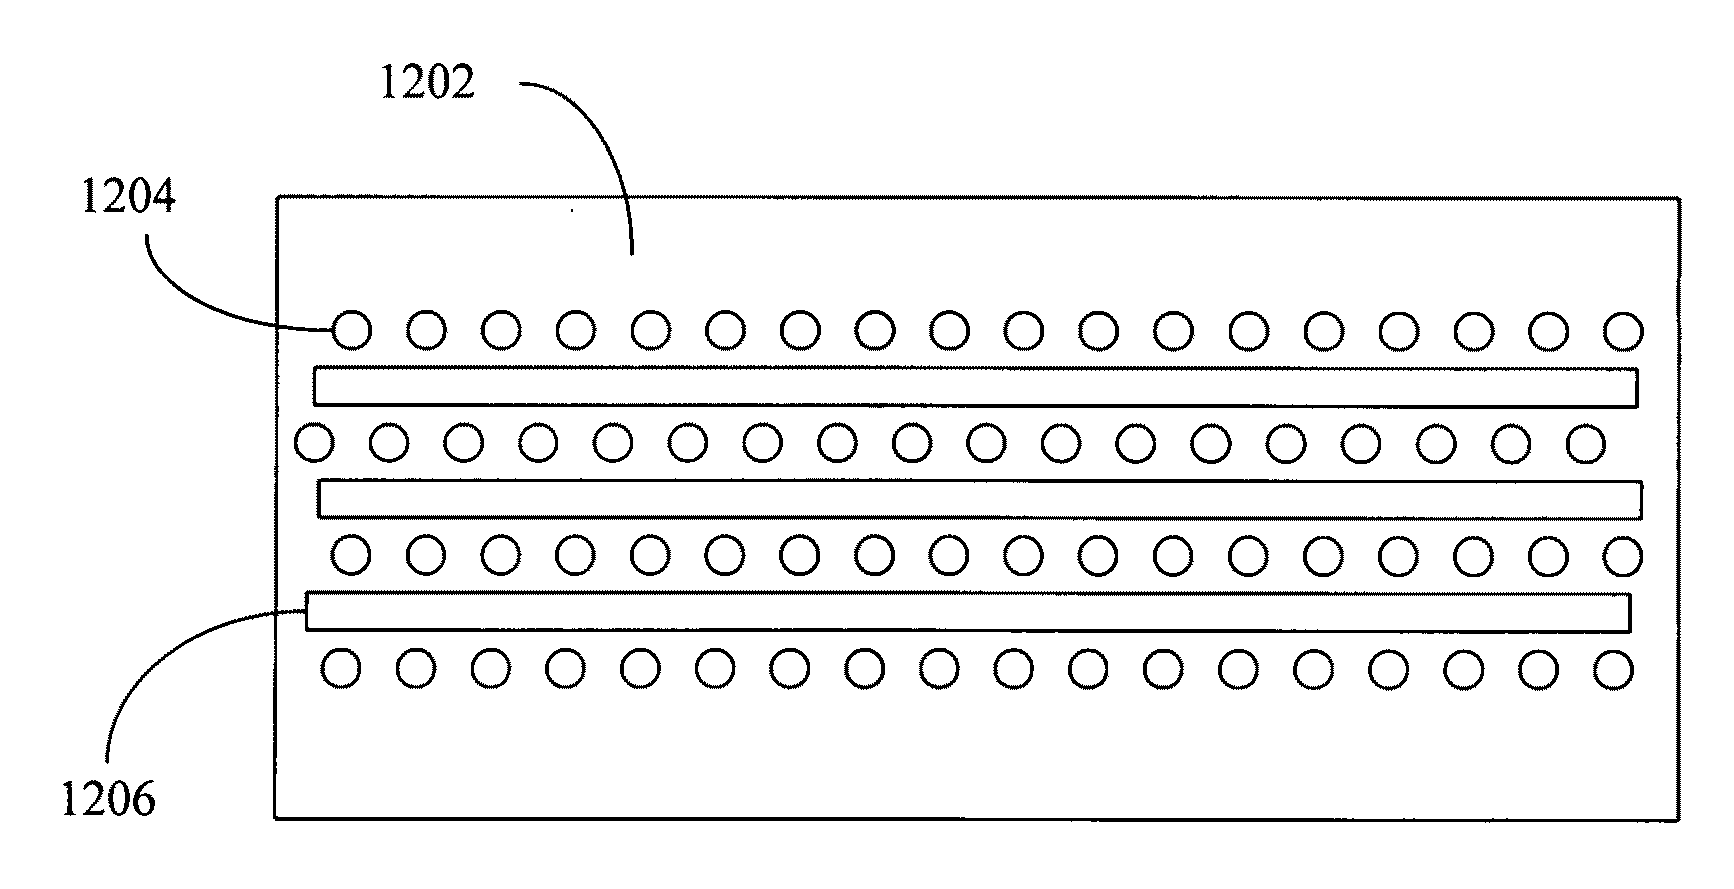 Stretched polymers, products containing stretched polymers, and their methods of manufacture and examination